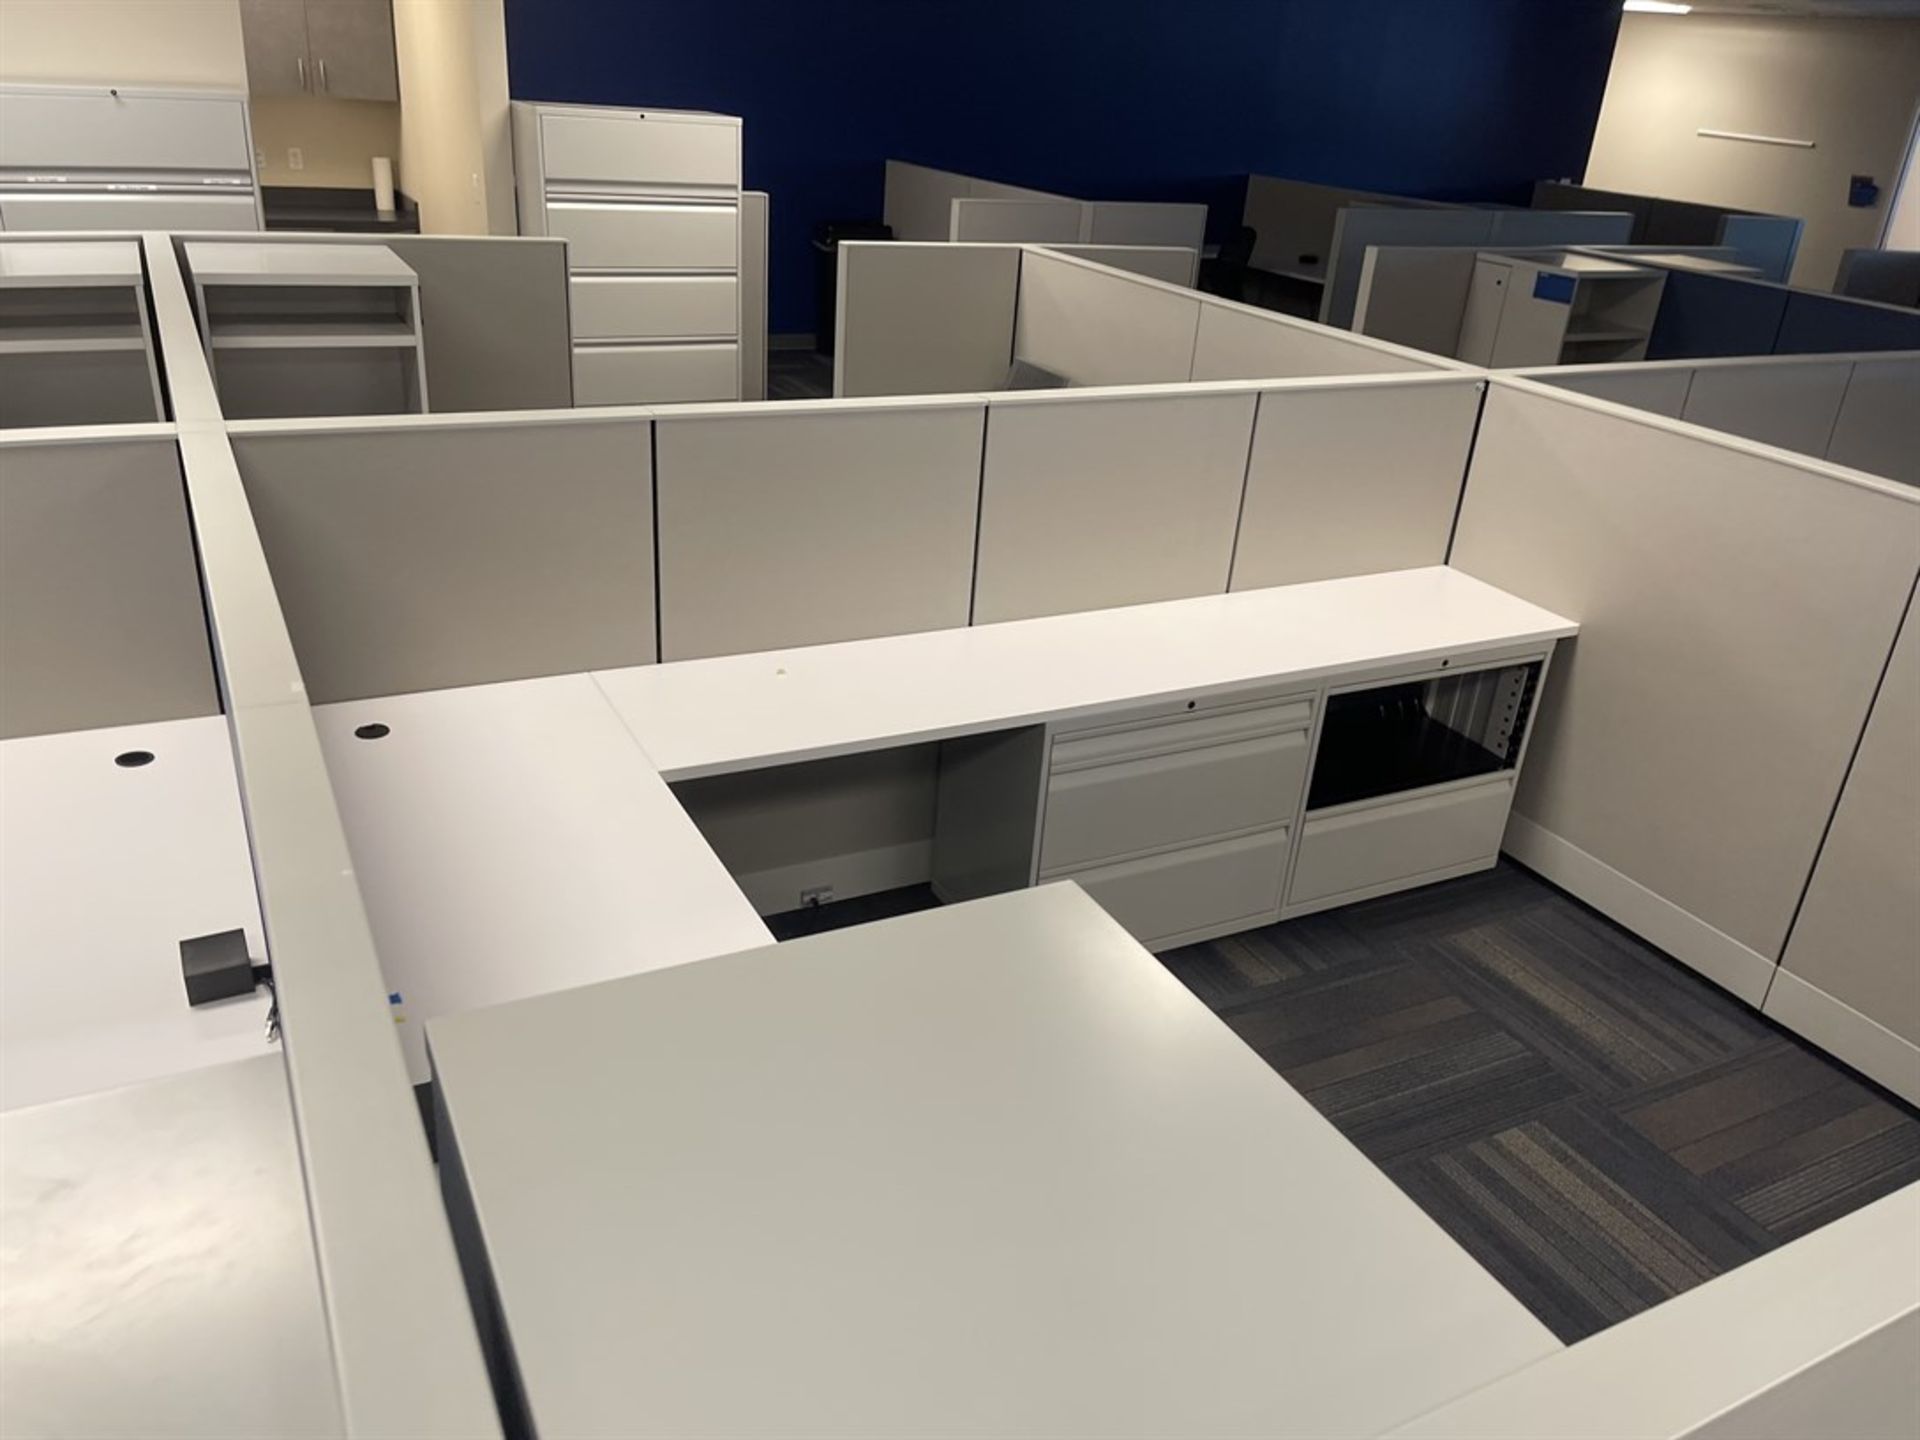 Lot of (10) Cubicles w/ Desk, Chairs, Tables and Cabinets - Image 4 of 6